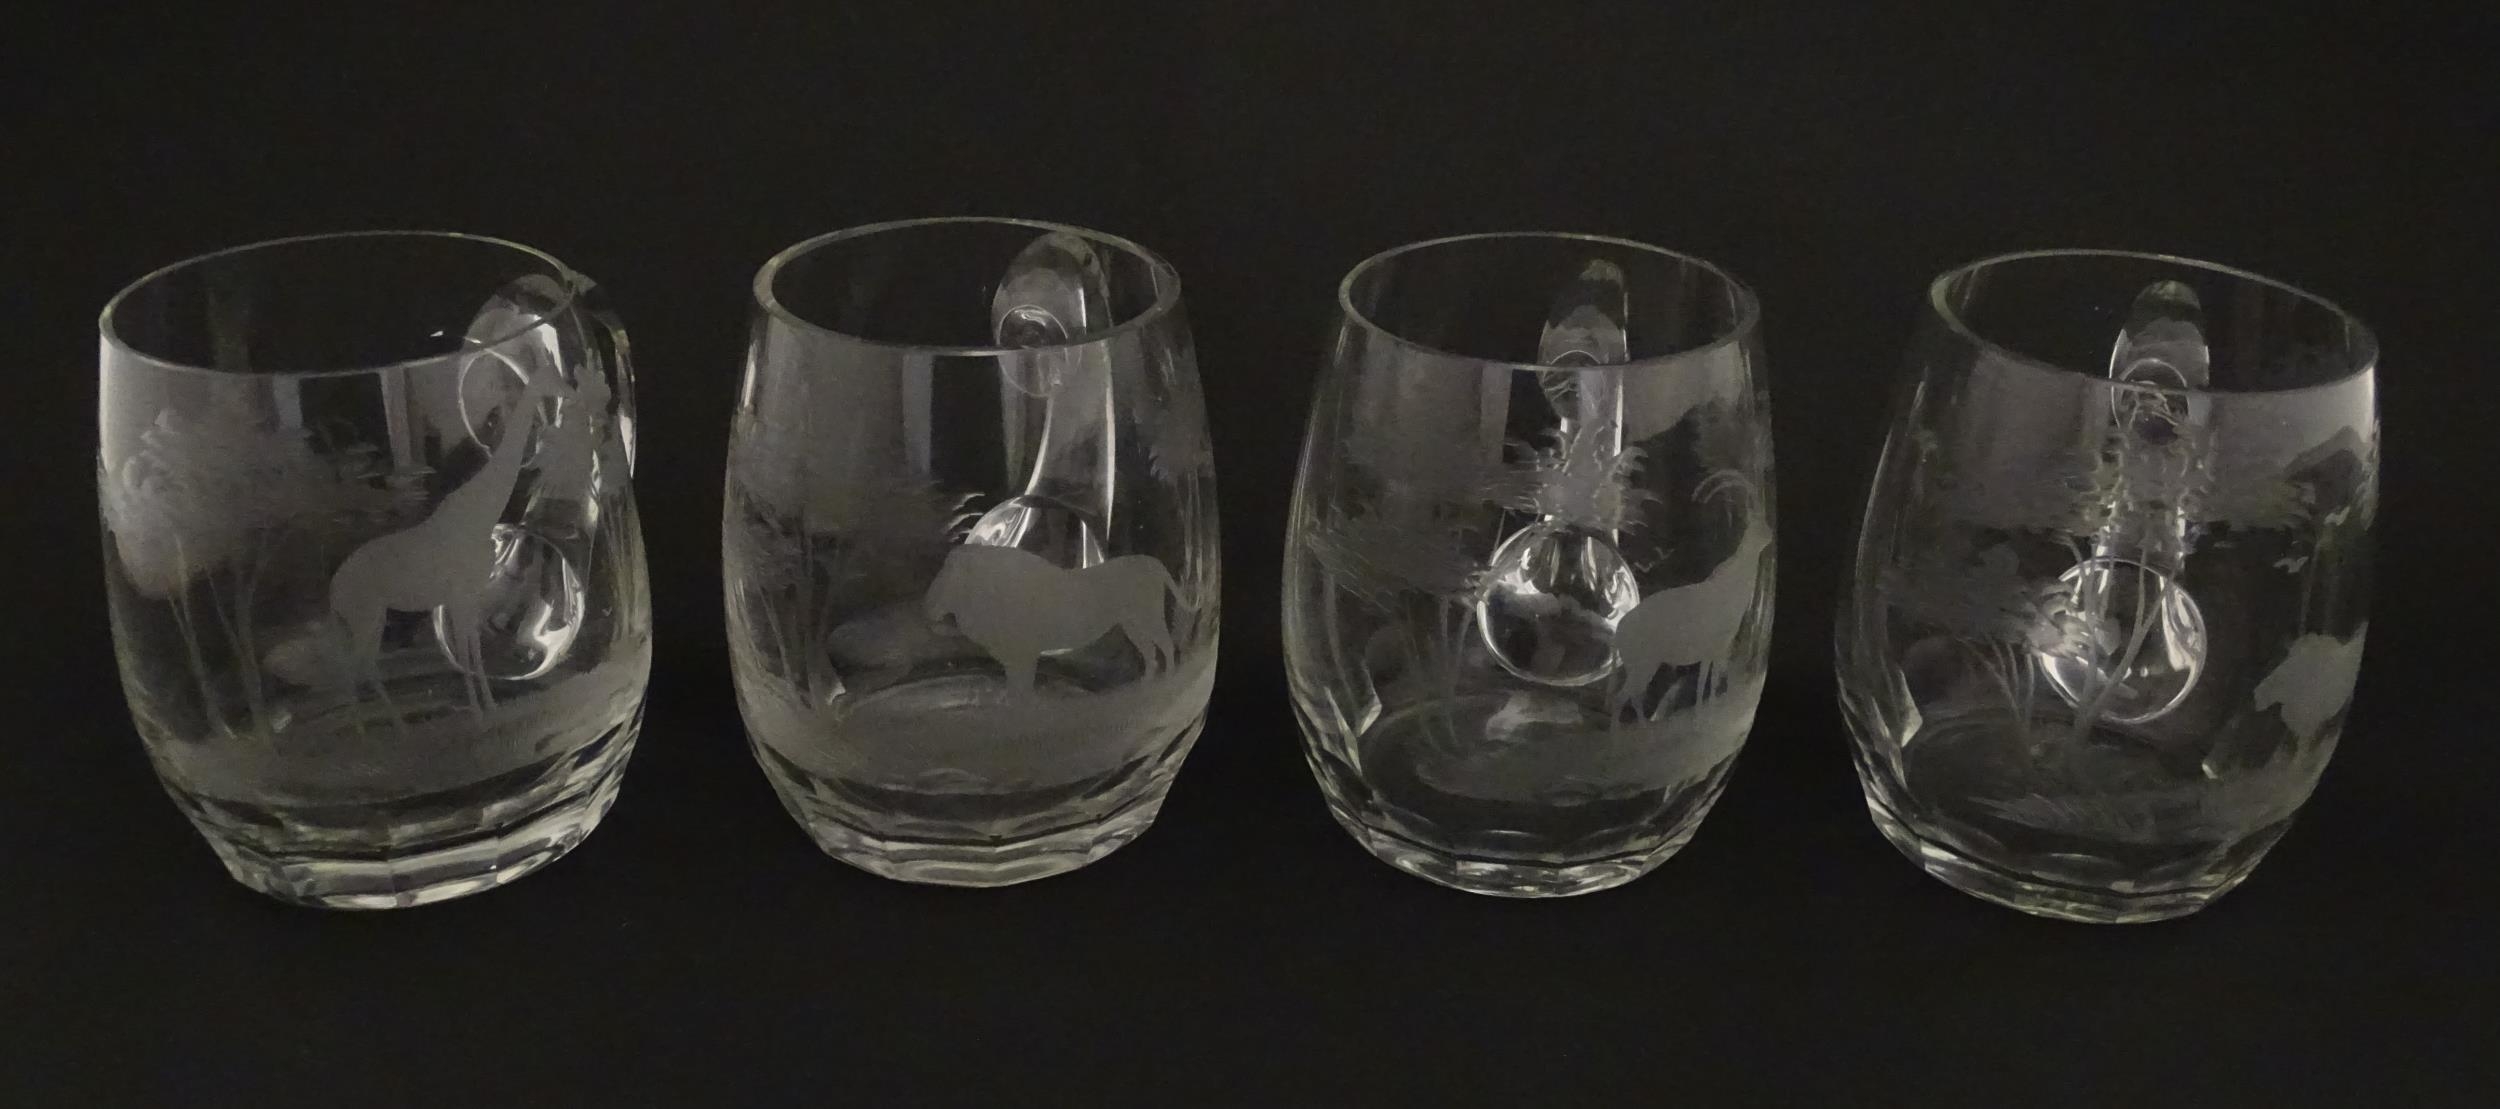 Seven Rowland Ward pint mugs / glasses with engraved Safari animal detail. Unsigned. Approx. 4 1/ - Image 11 of 26